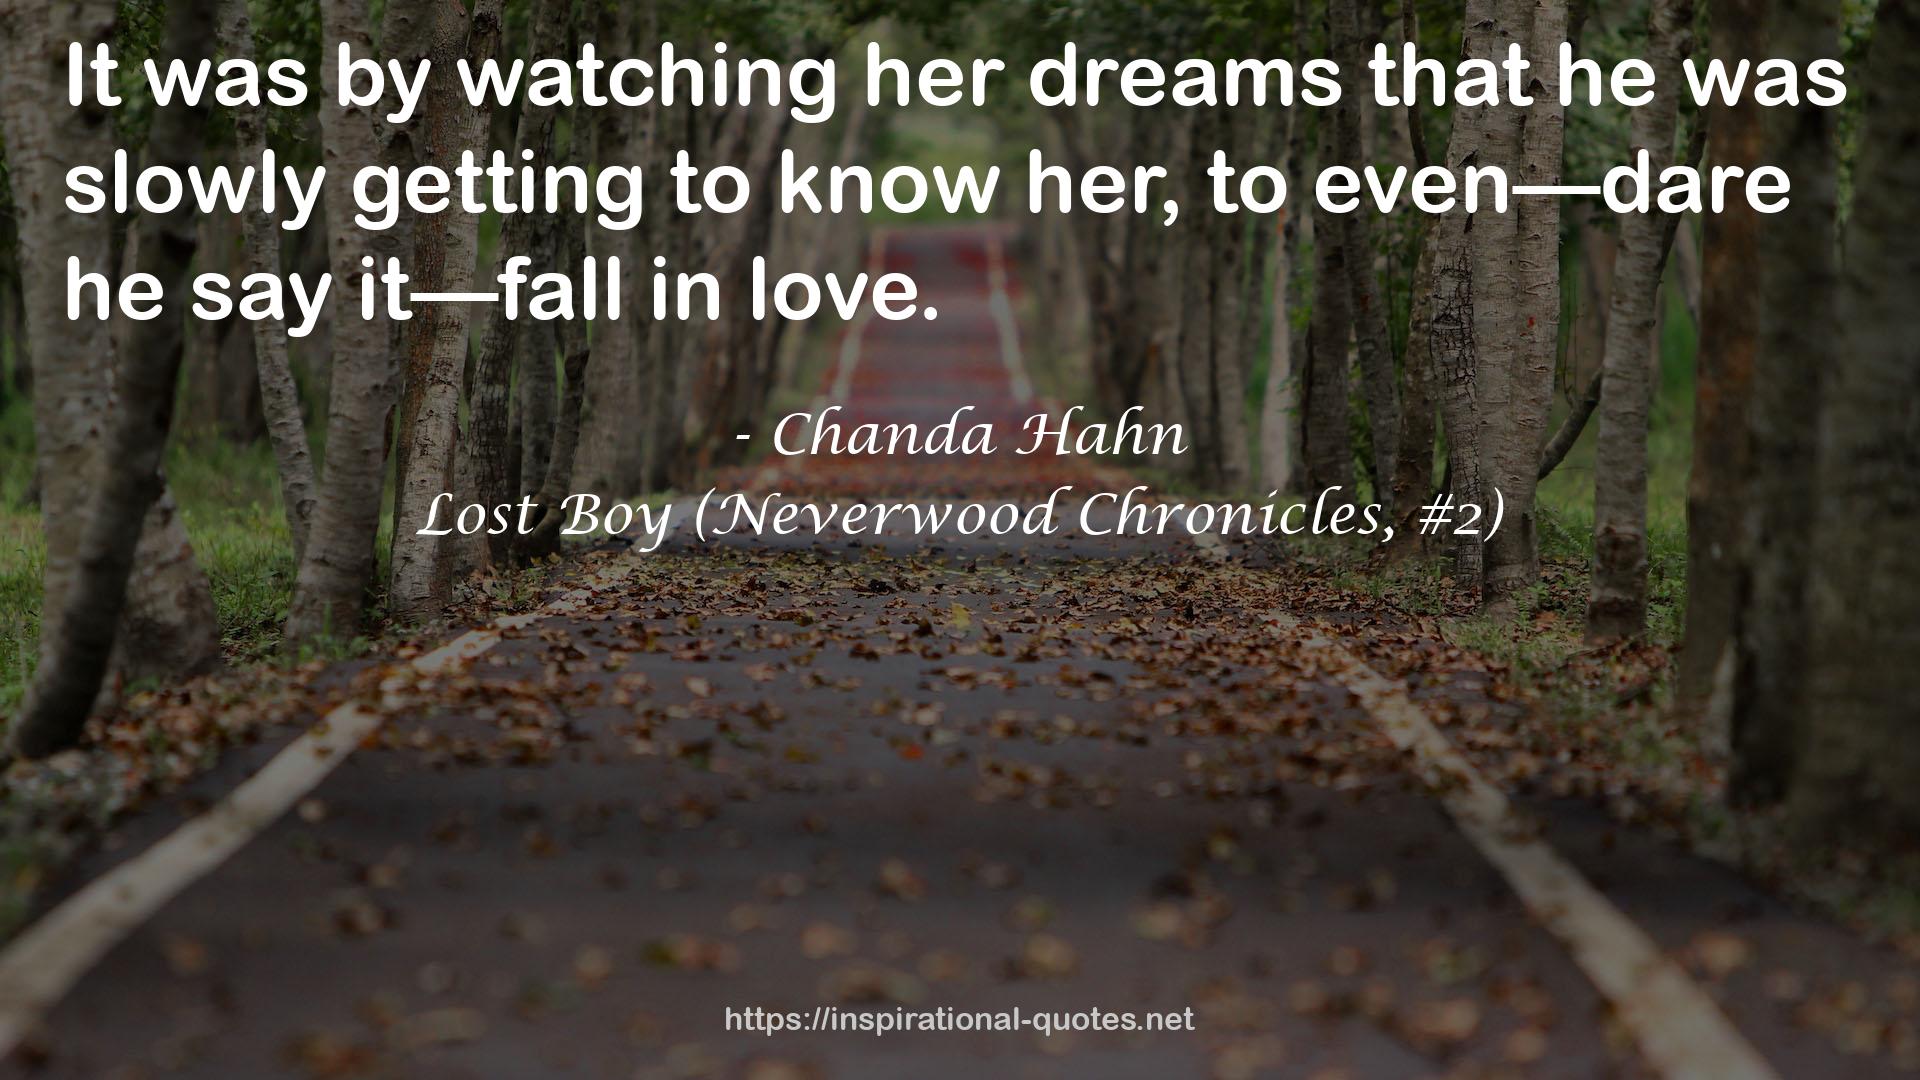 Lost Boy (Neverwood Chronicles, #2) QUOTES